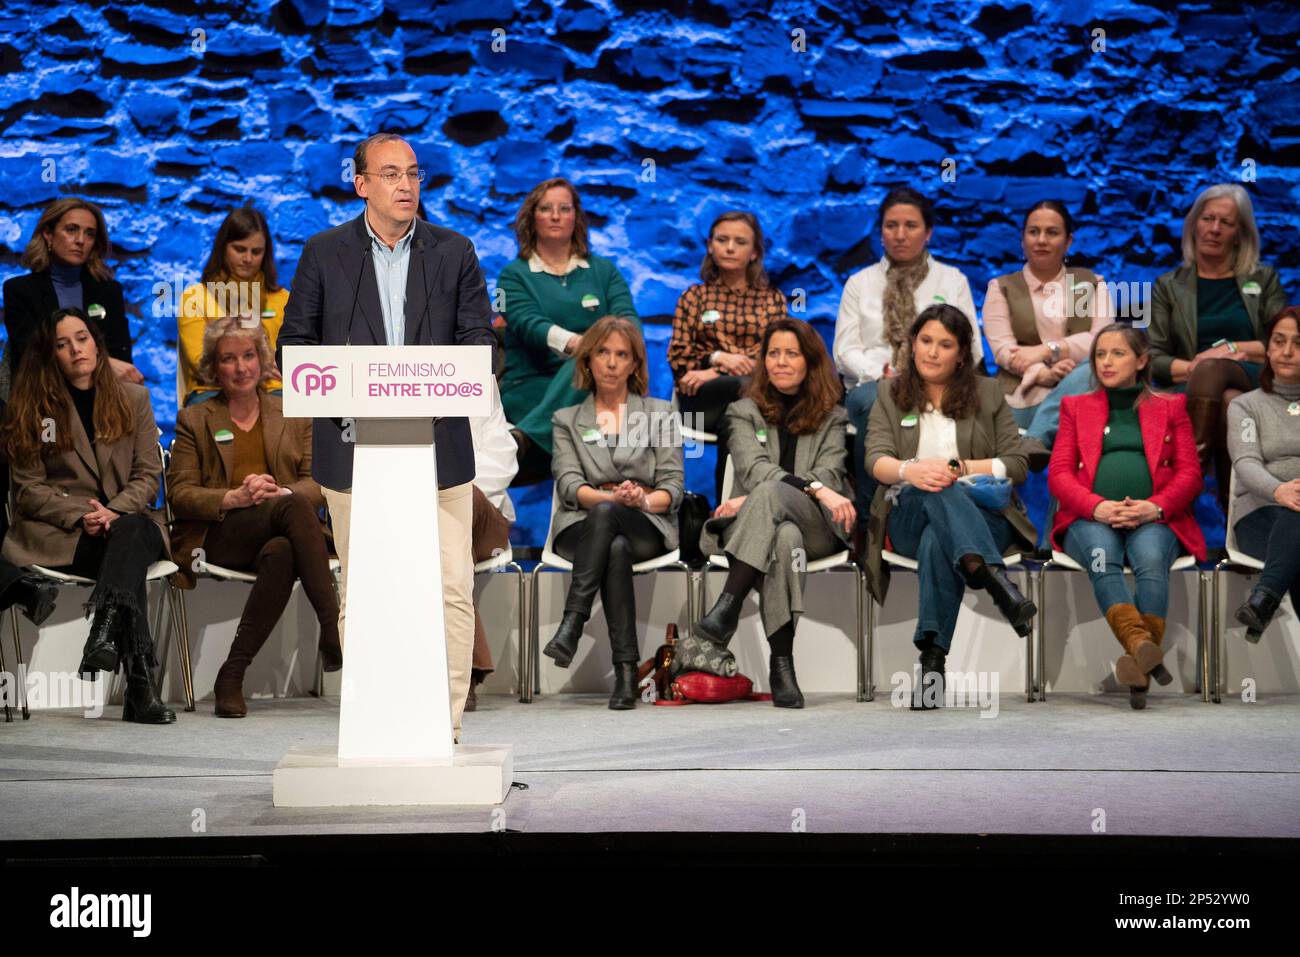 The PP candidate for mayor of Caceres, Rafael Mateos, speaks during an act  of the PP in defense of equality on the occasion of International Women's  Day, at the Gran Teatro, on